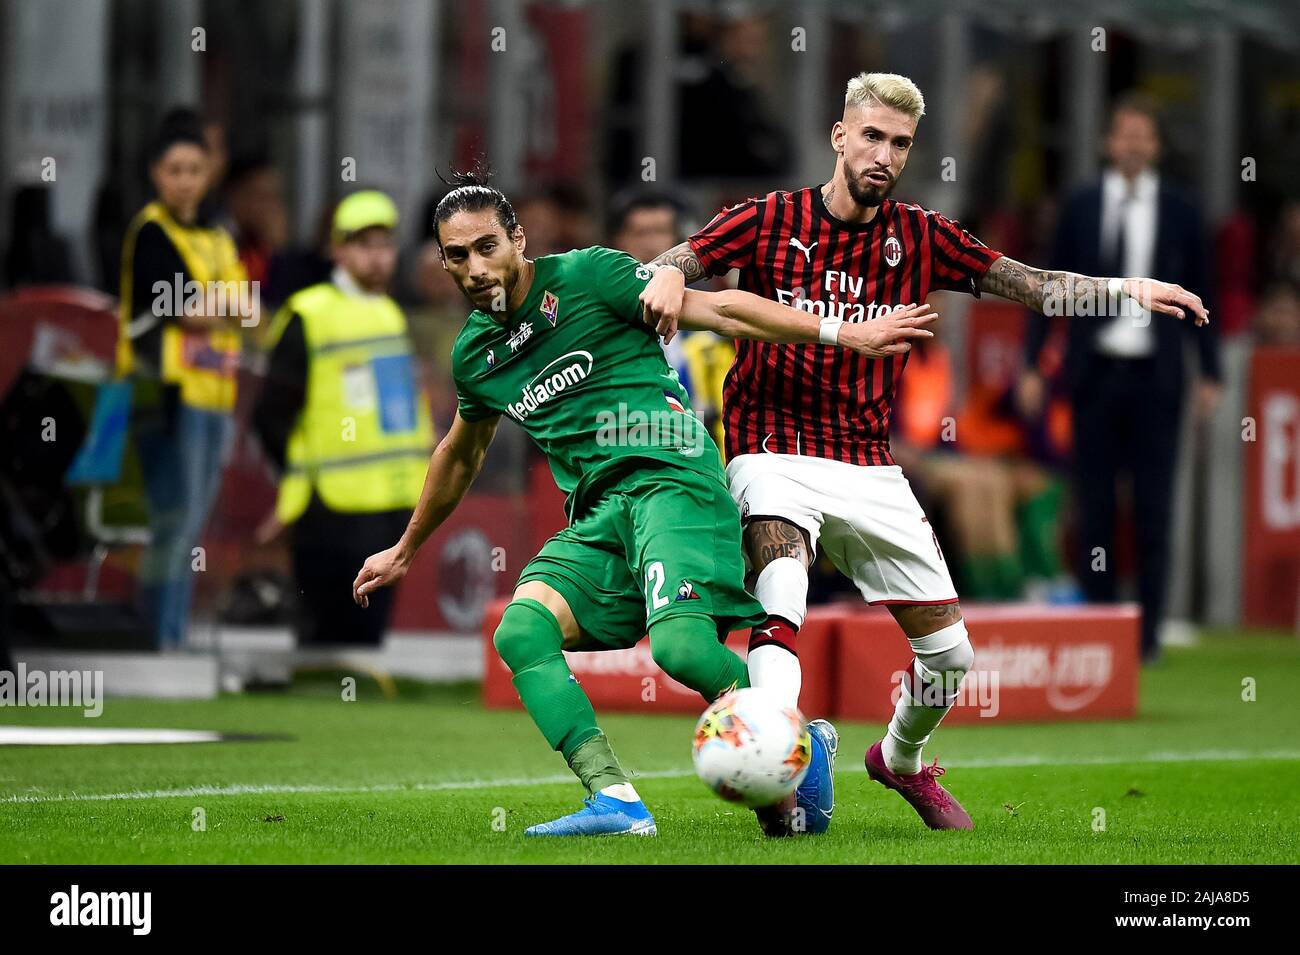 Milan, Italy. 29 September, 2019: Martin Caceres (L) of ACF Fiorentina competes for the ball with Samuel Castillejo of AC Milan during the Serie A football match between AC Milan and ACF Fiorentina. ACF Fiorentina won 3-1 over AC Milan. Credit: Nicolò Campo/Alamy Live News Stock Photo